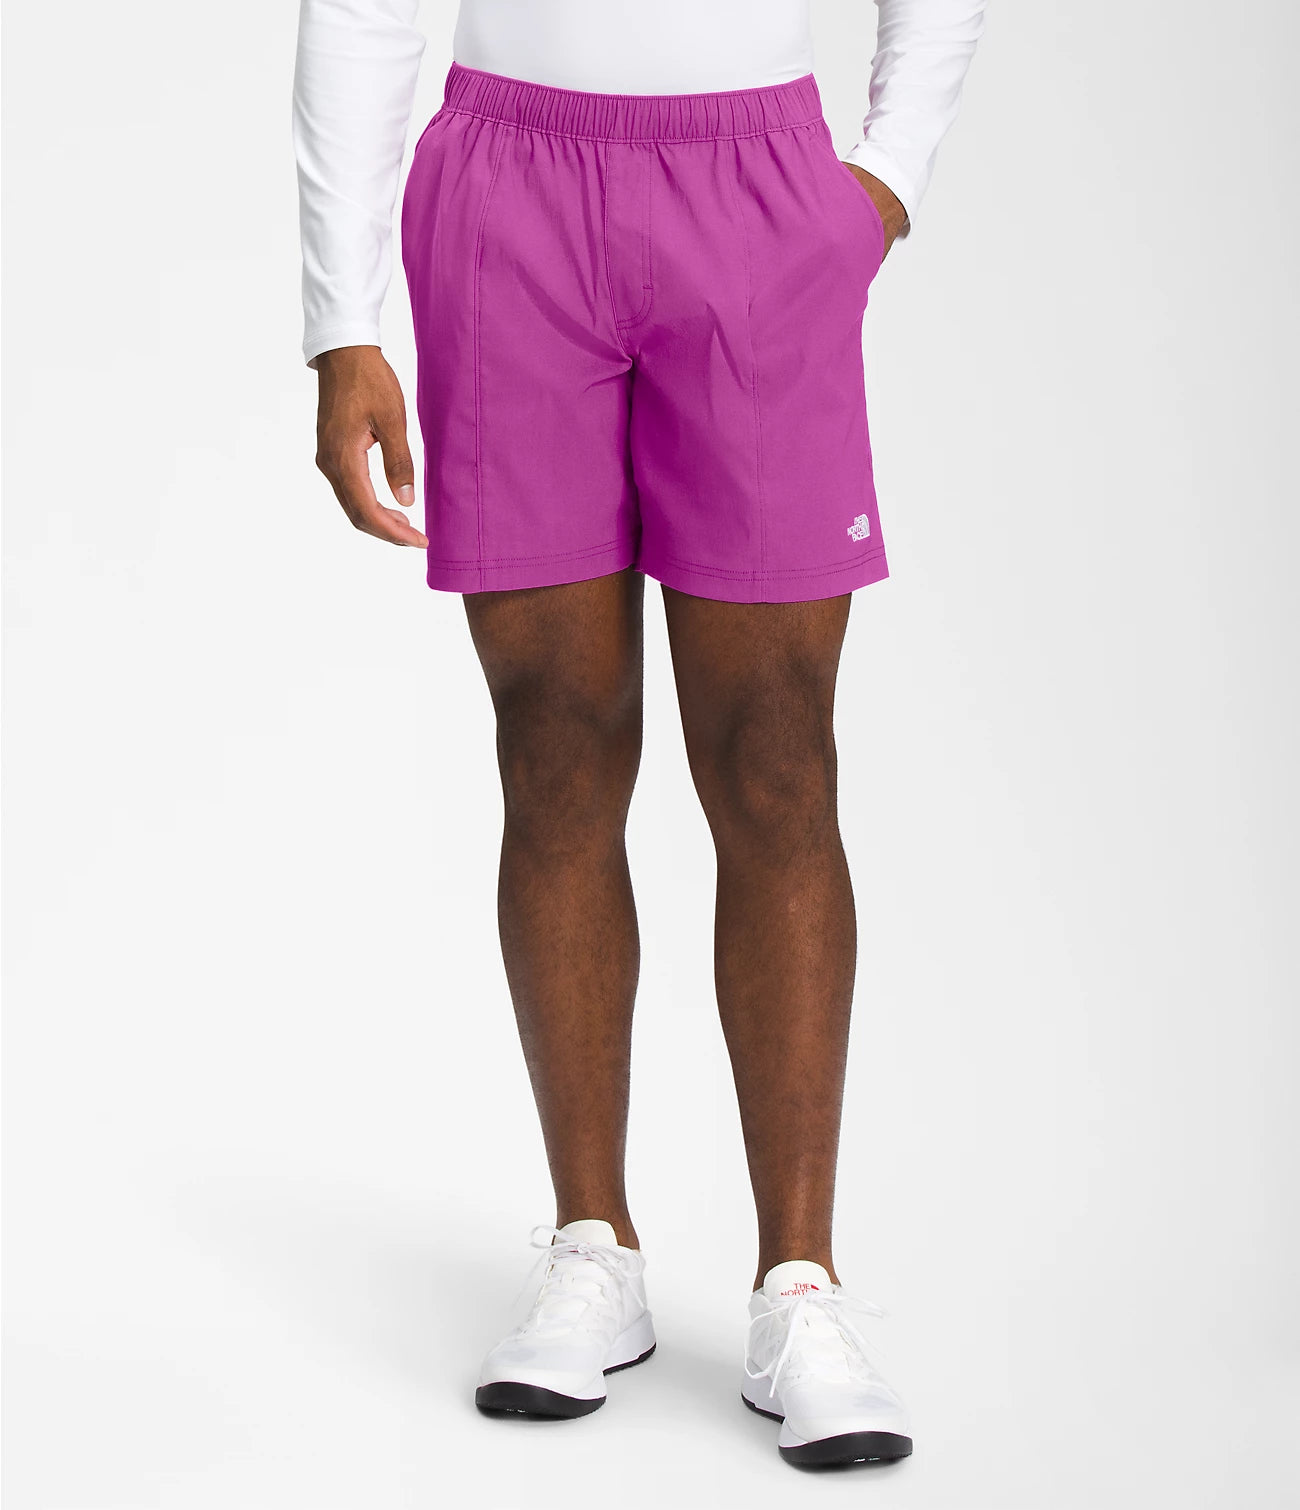 Men's Class V Pull-On Short in the color purple.